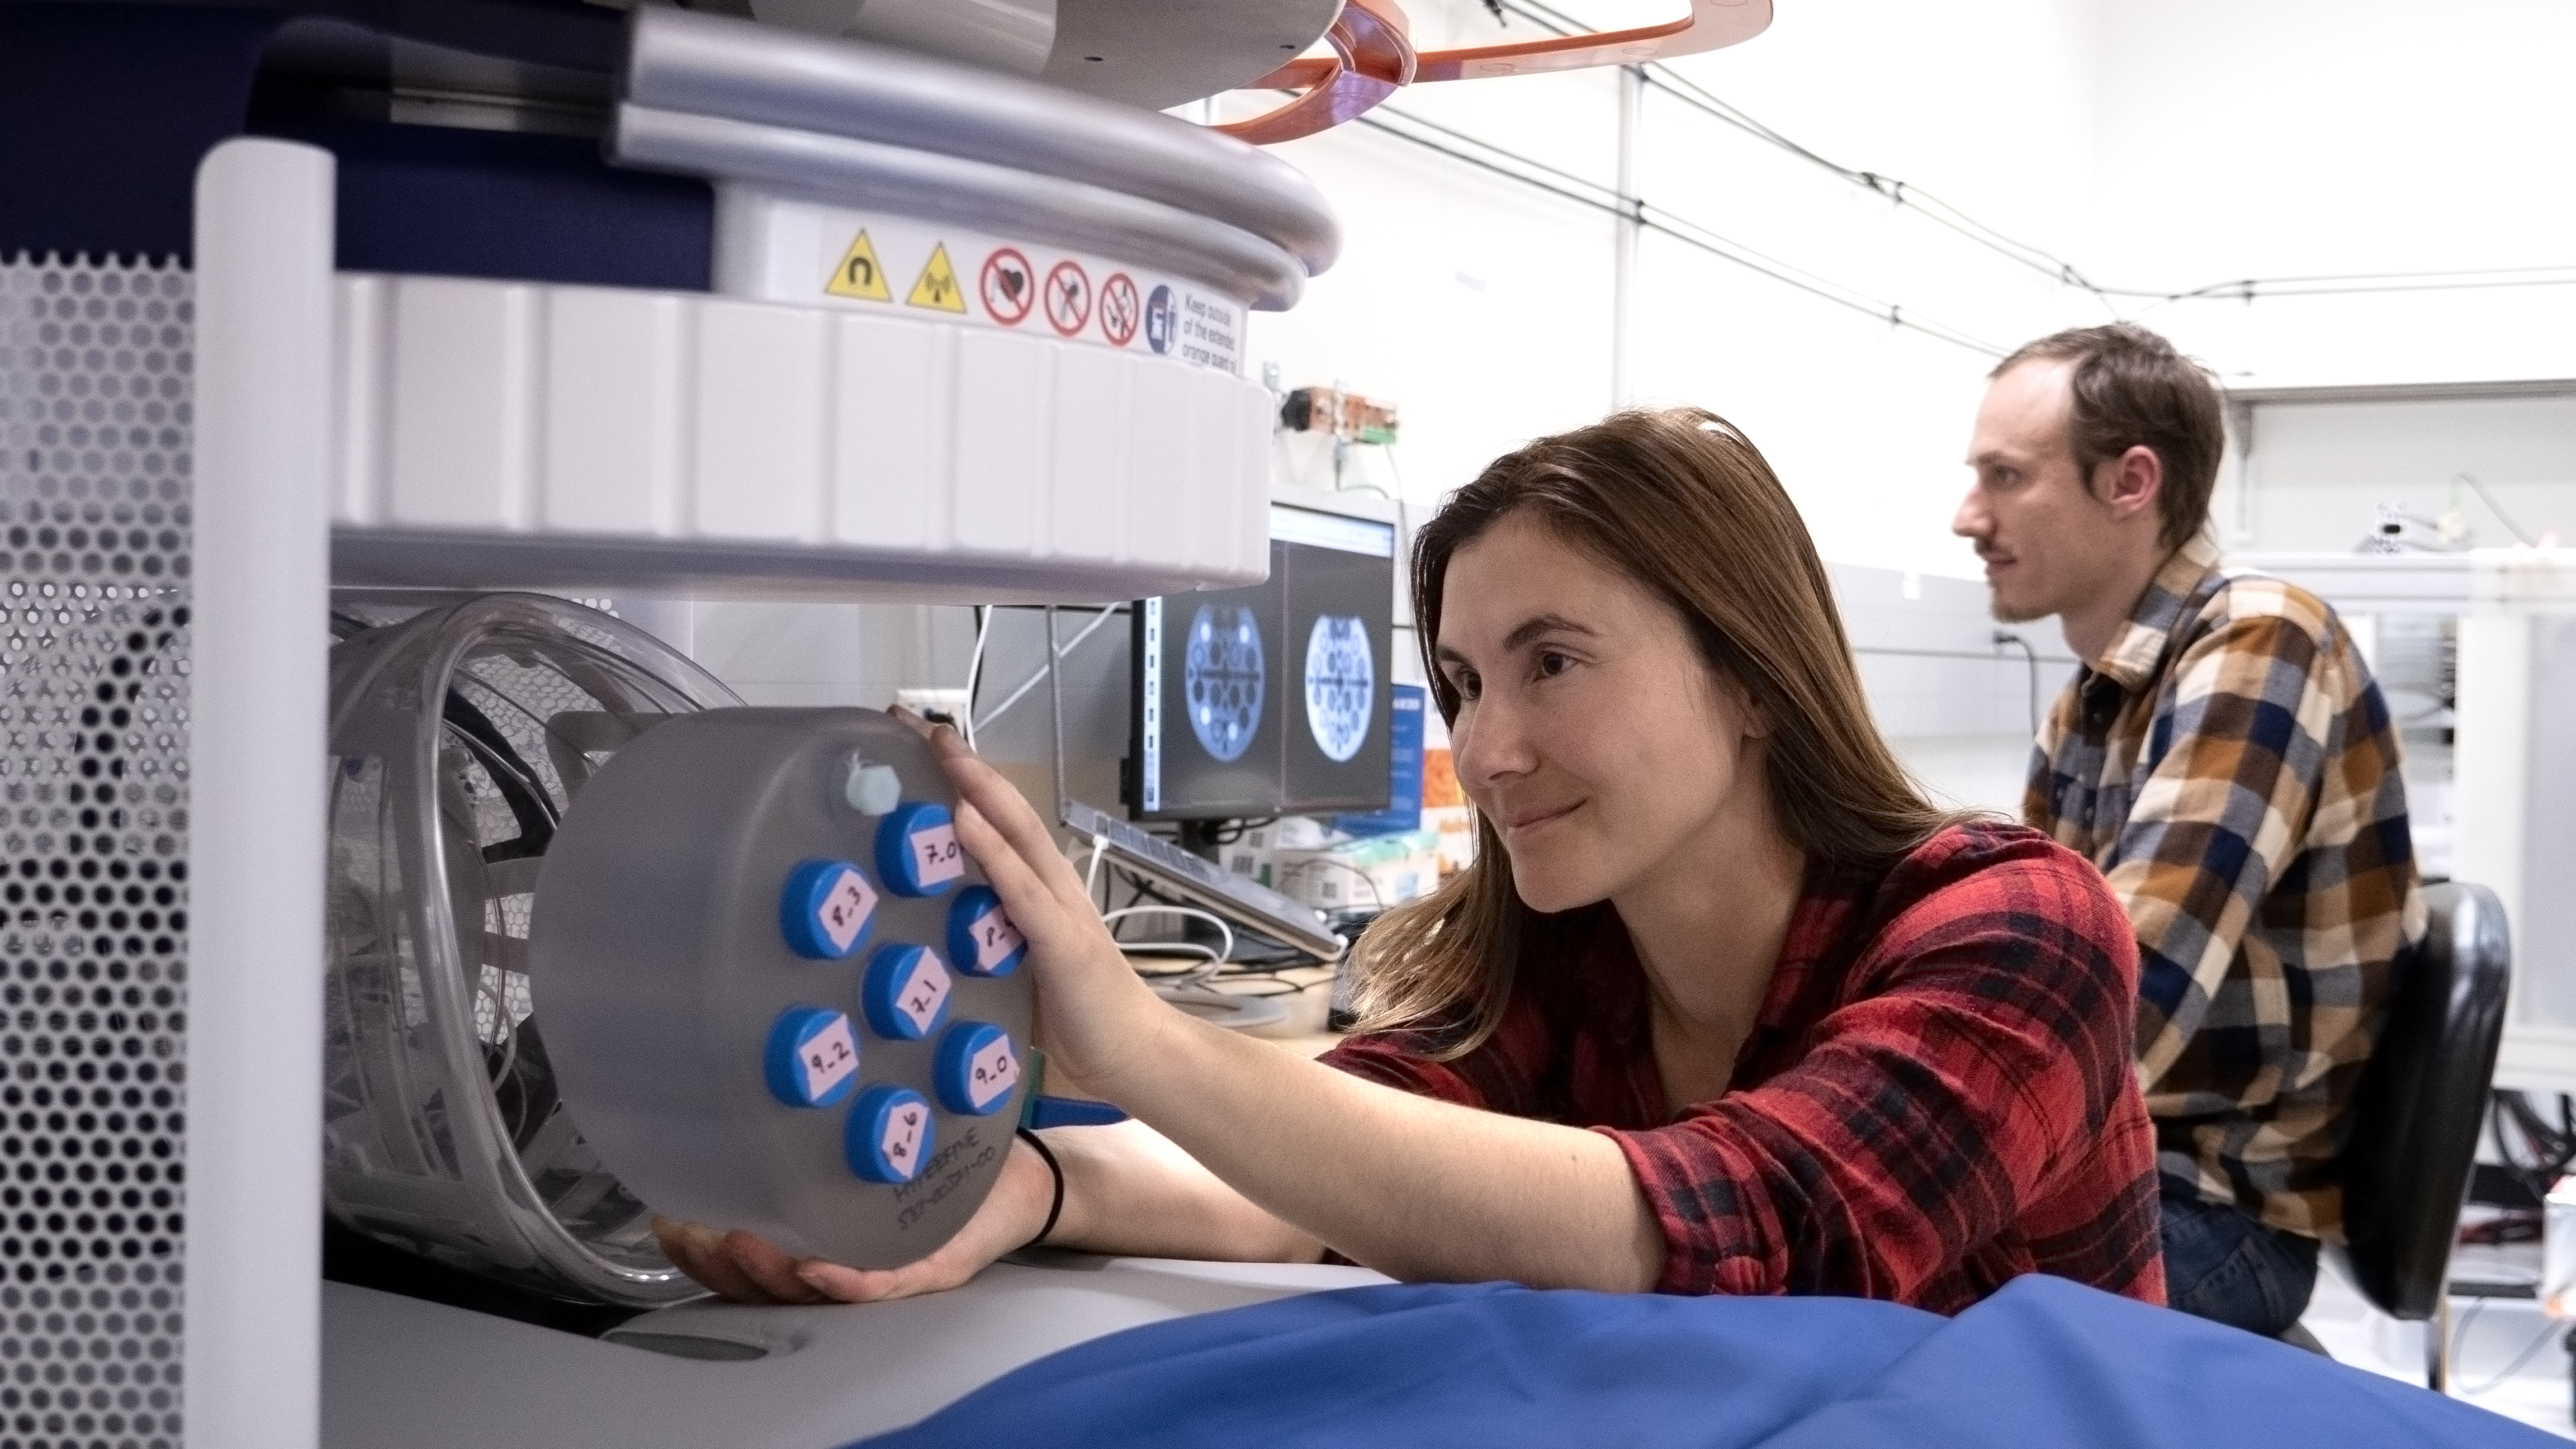 A woman leans over an MRI machine to reach a set of samples in a round holder, while a man sits behind her at a computer looking at MRI images. 